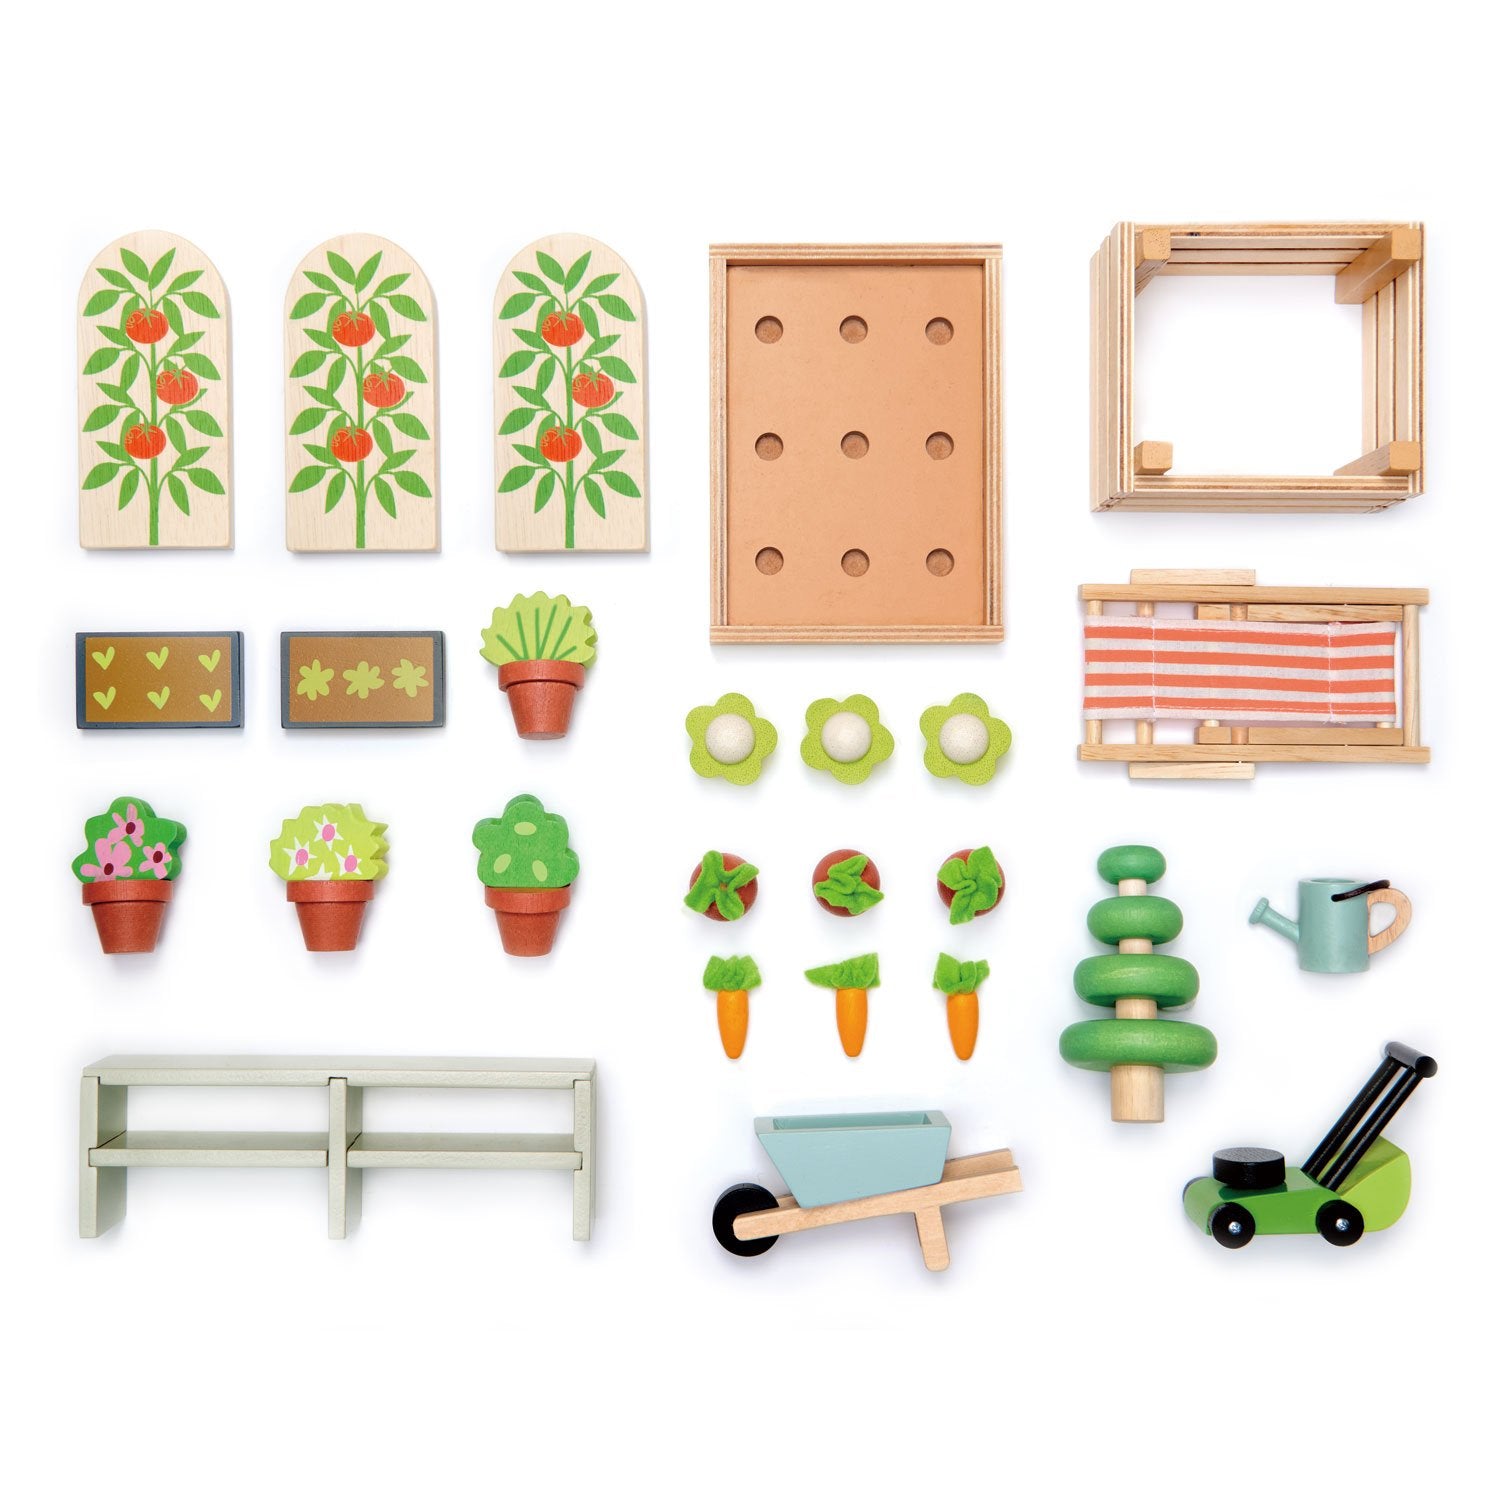 GREEN HOUSE AND GARDEN WOODEN TOY SET